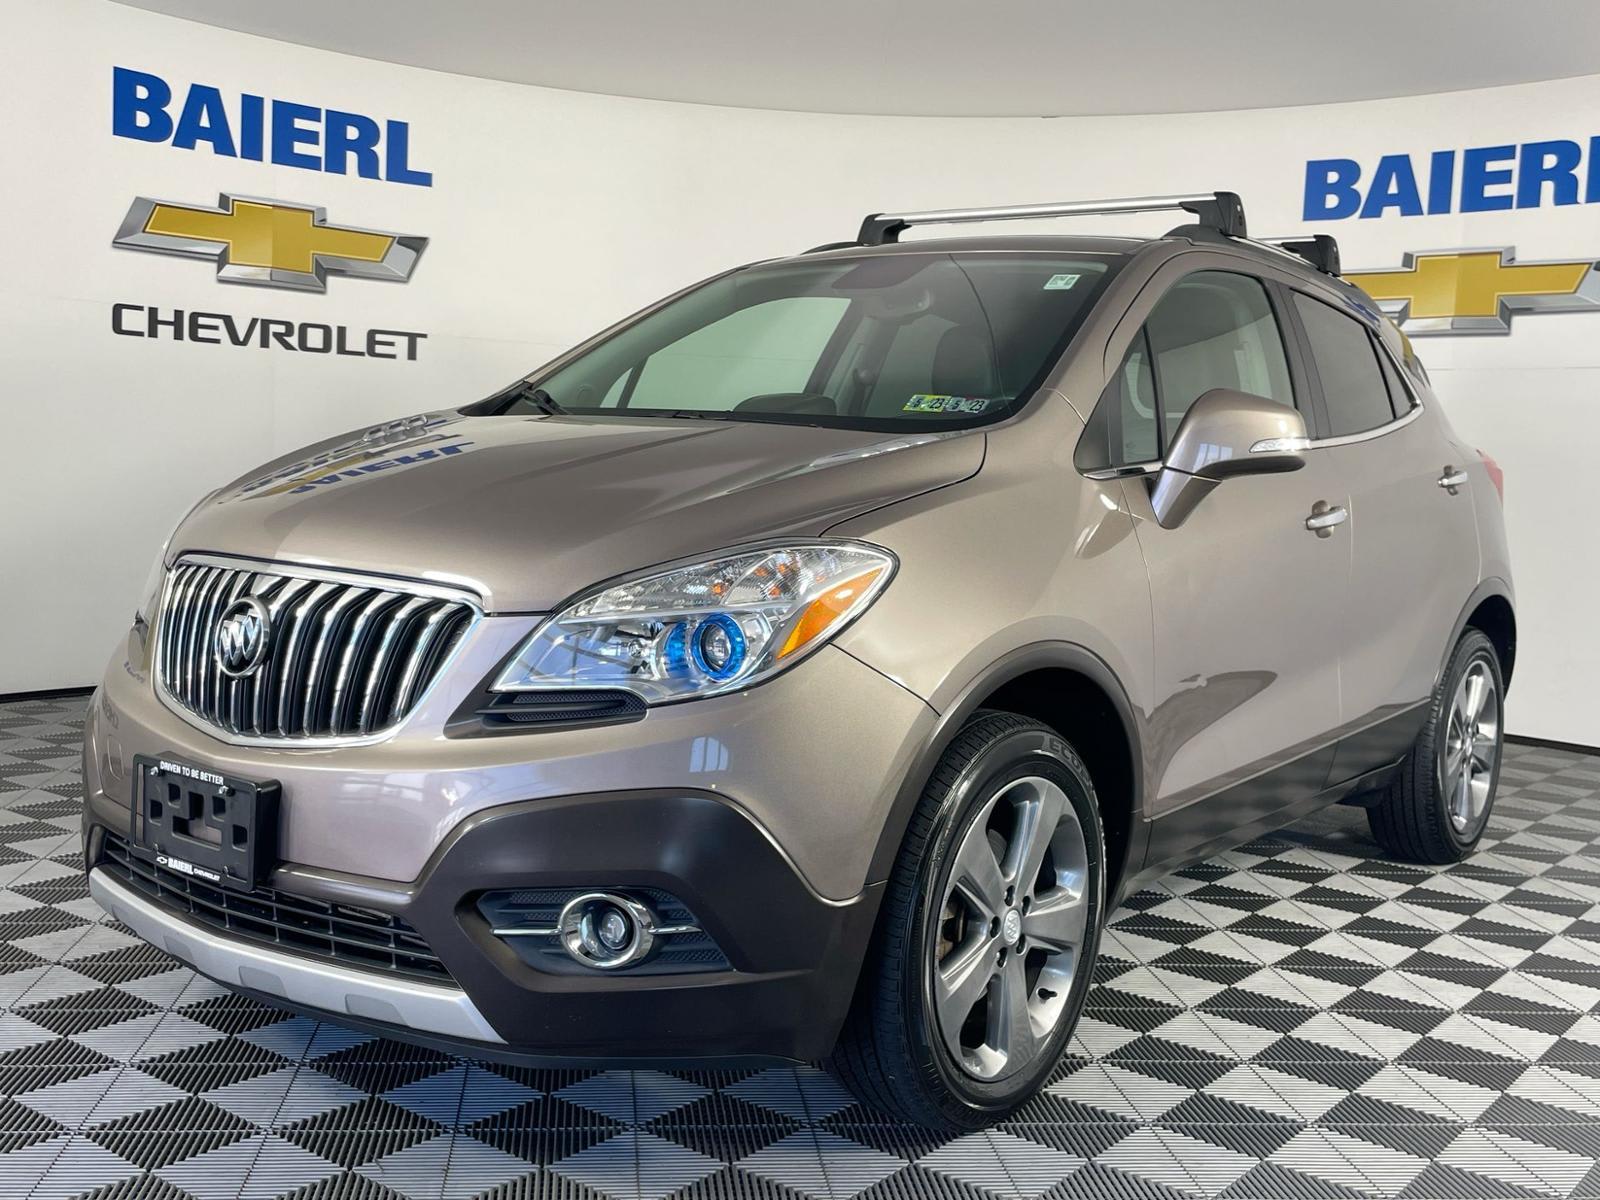 Pre-Owned 2014 Buick Encore AWD 4dr Leather Sport Utility in Wexford  #V527736A | Baierl Chevrolet